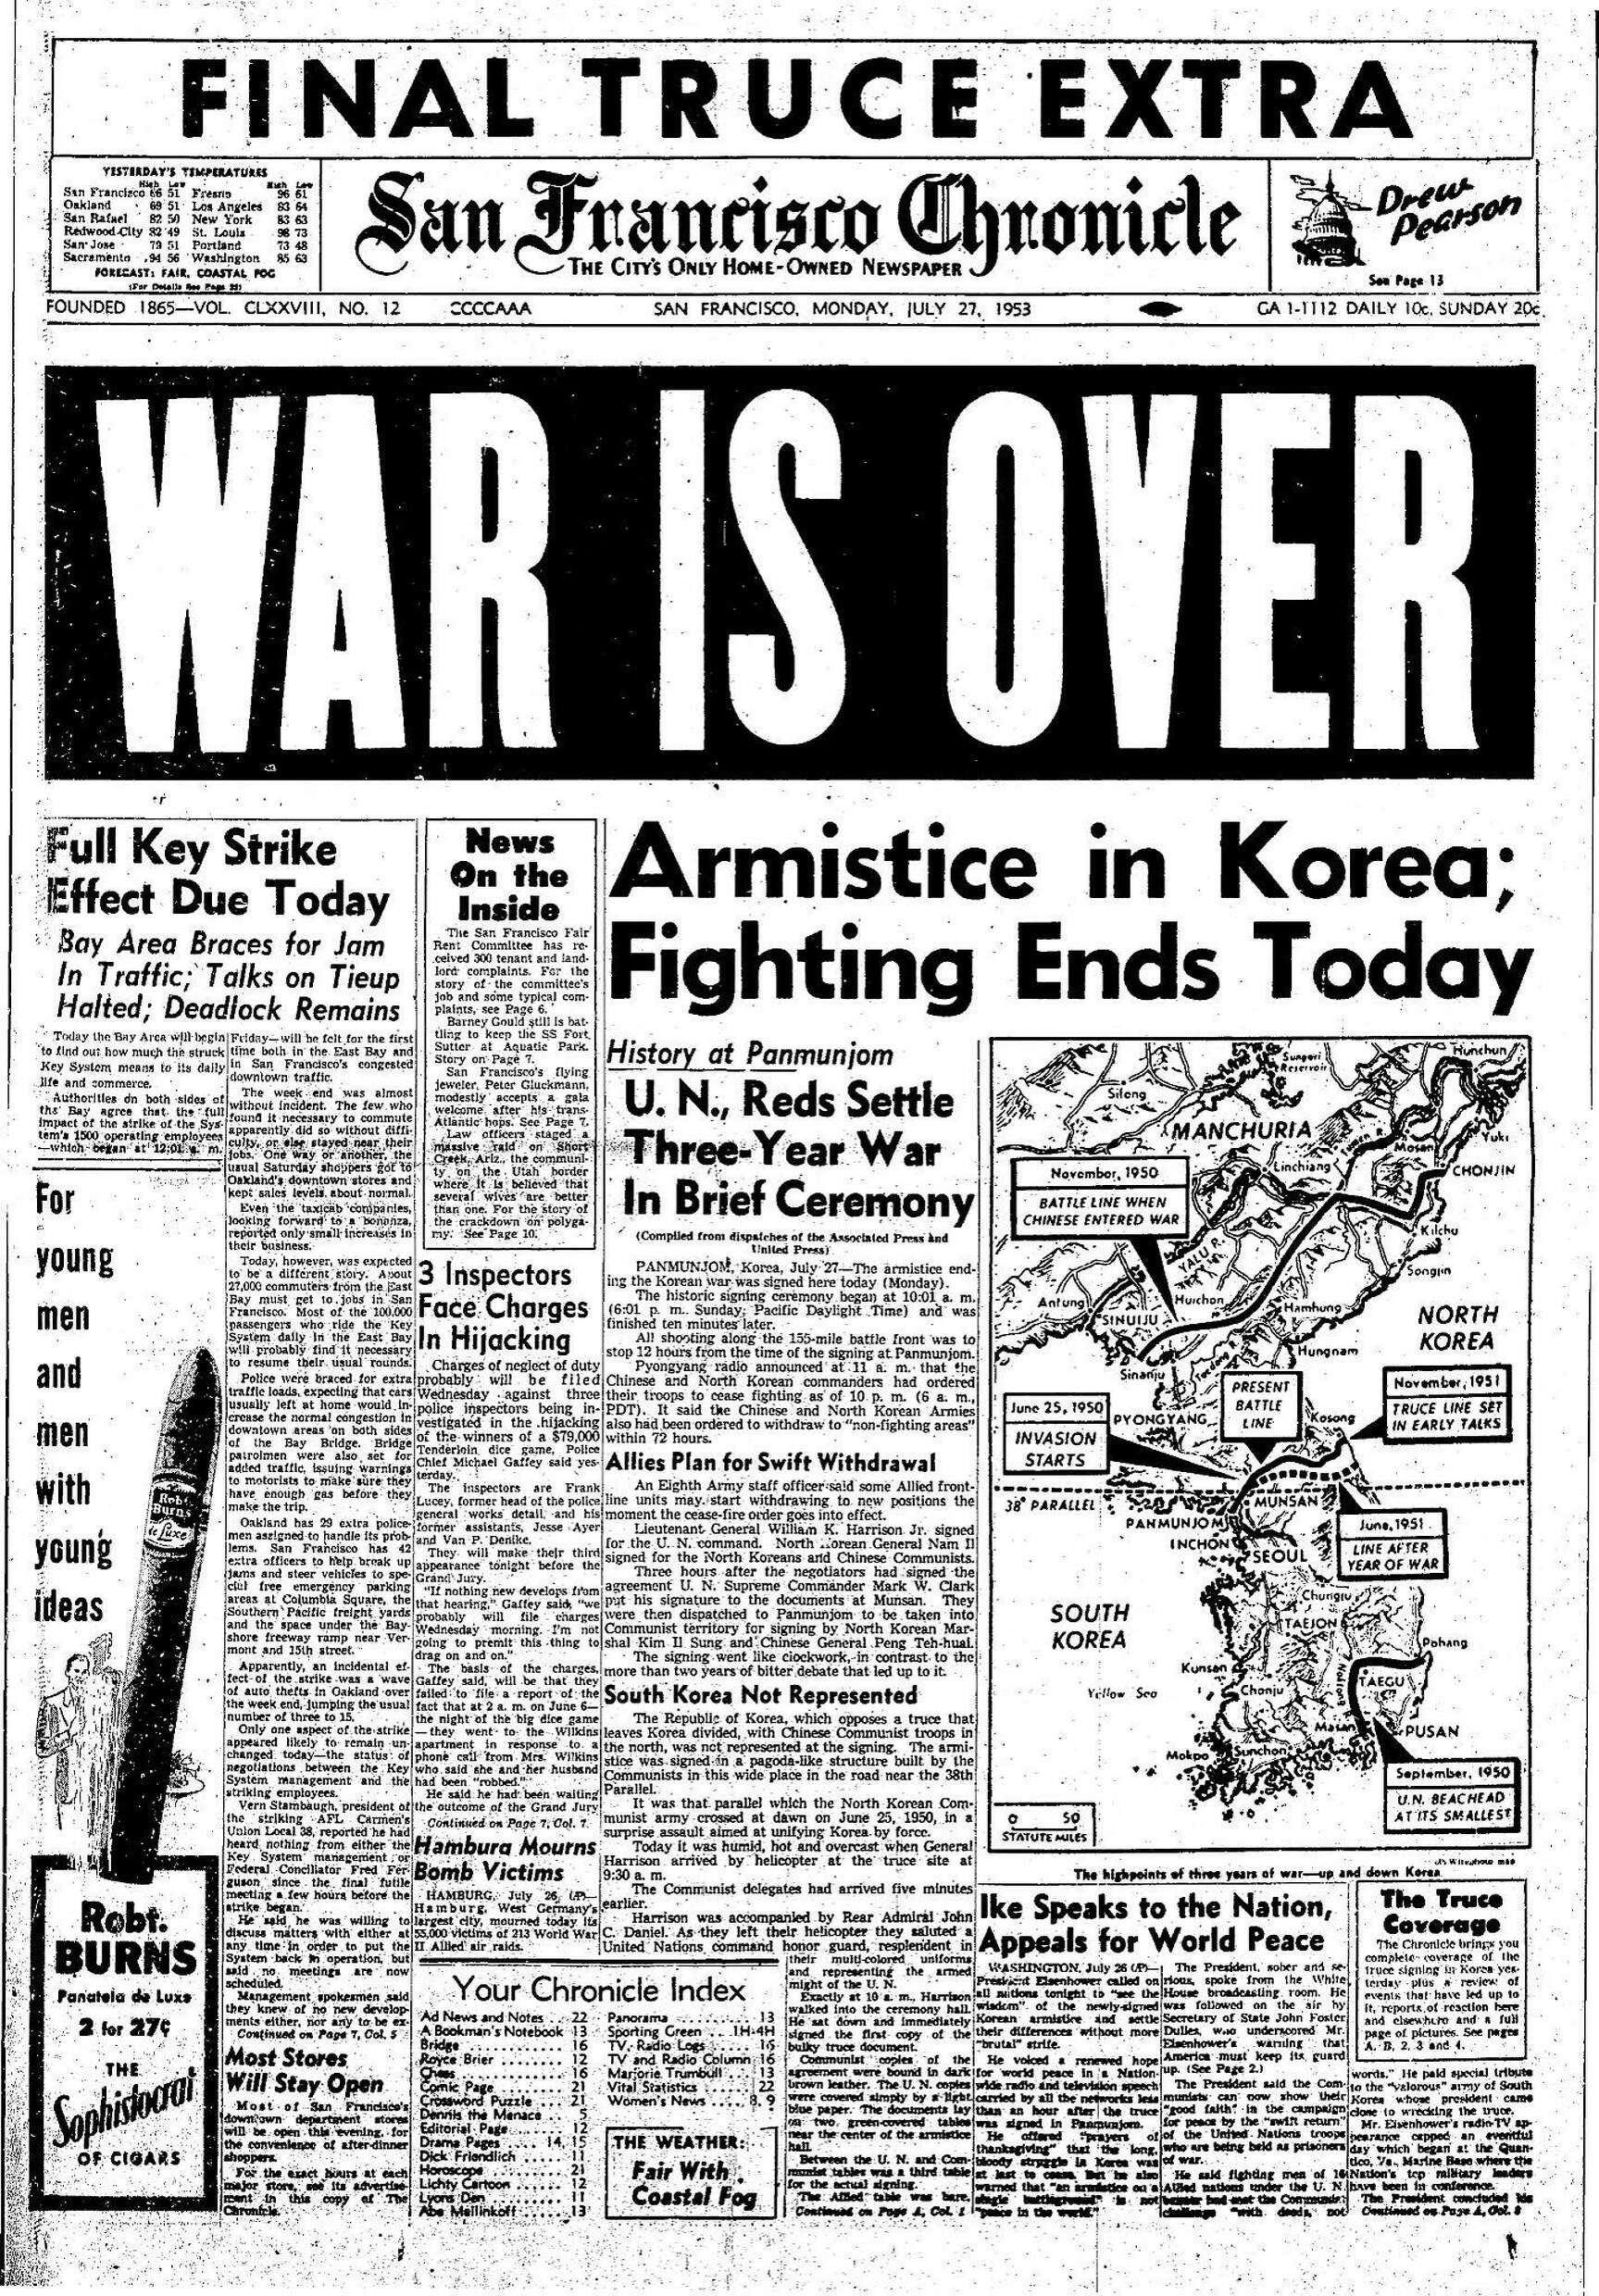 Chronicle Covers: The disputed end to the Korean War